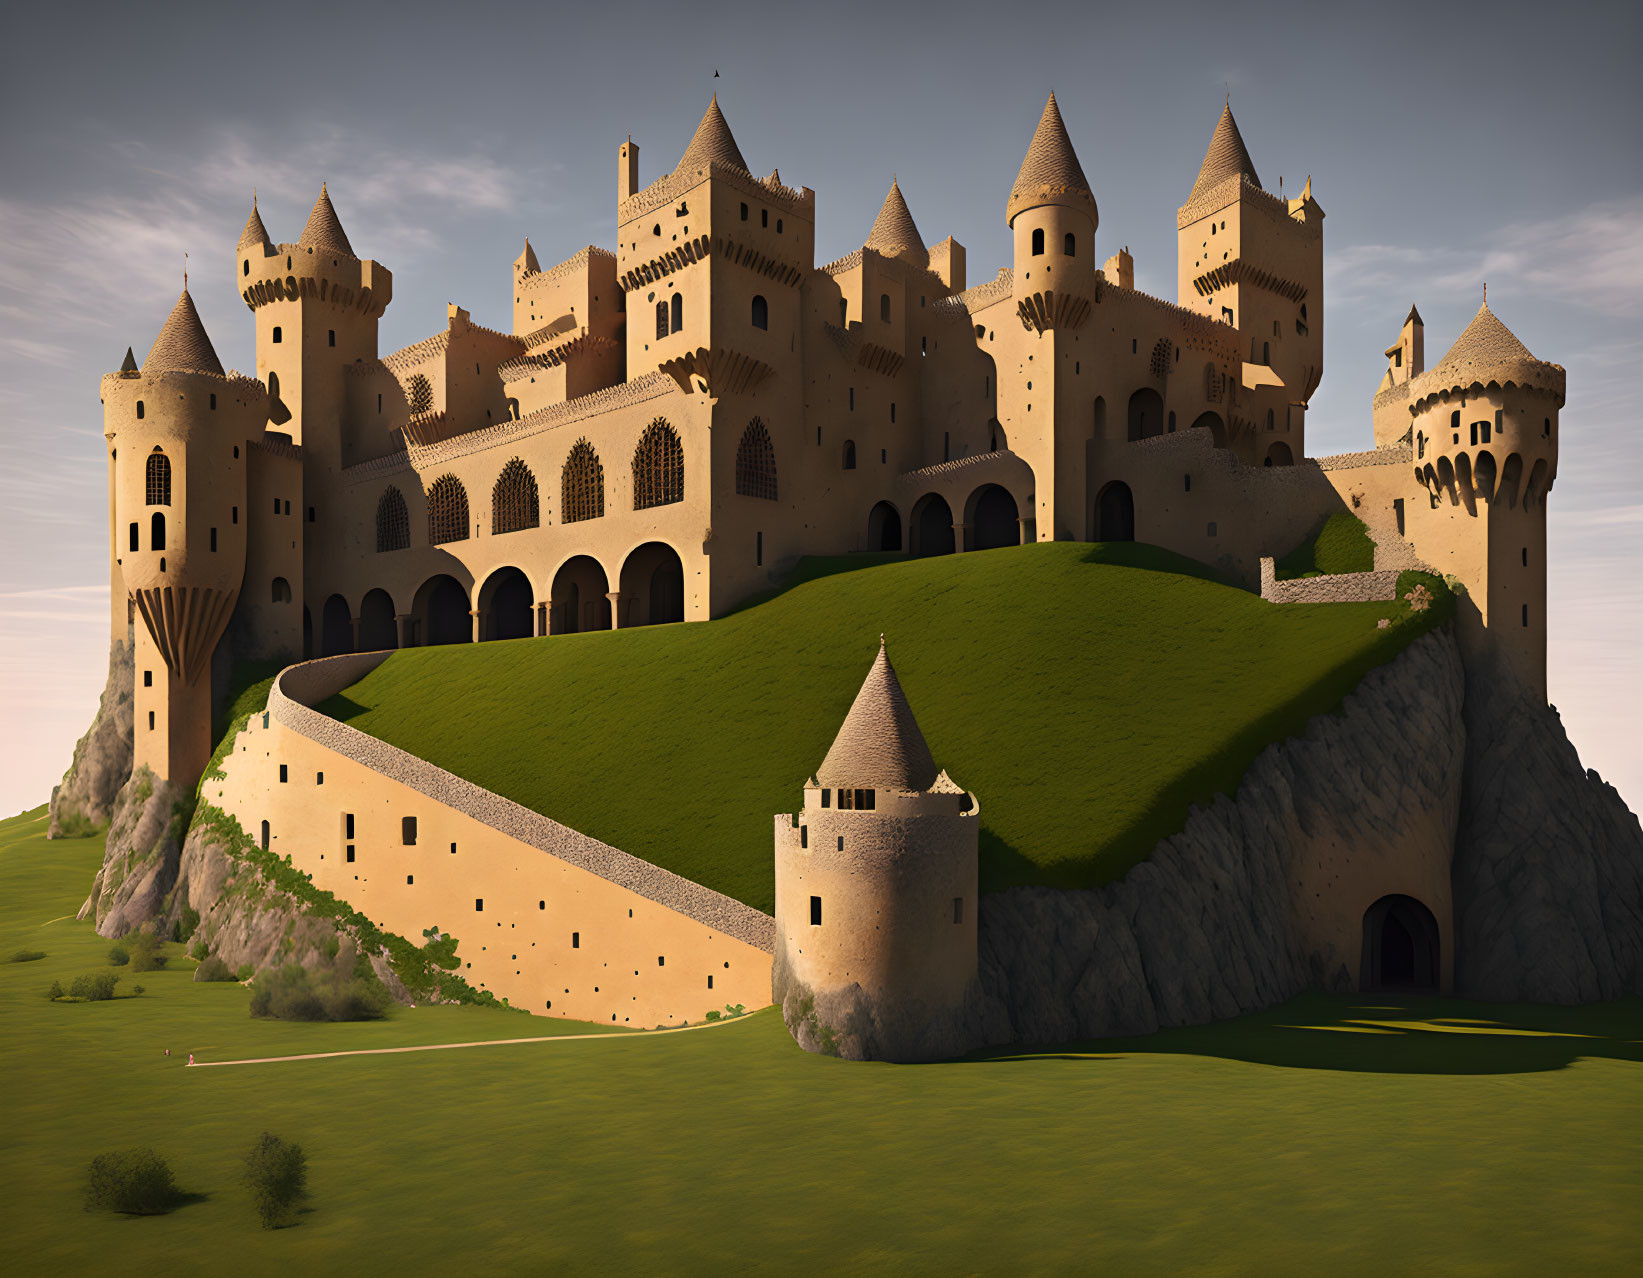 Majestic castle with towers and turrets on grassy hill under clear sky